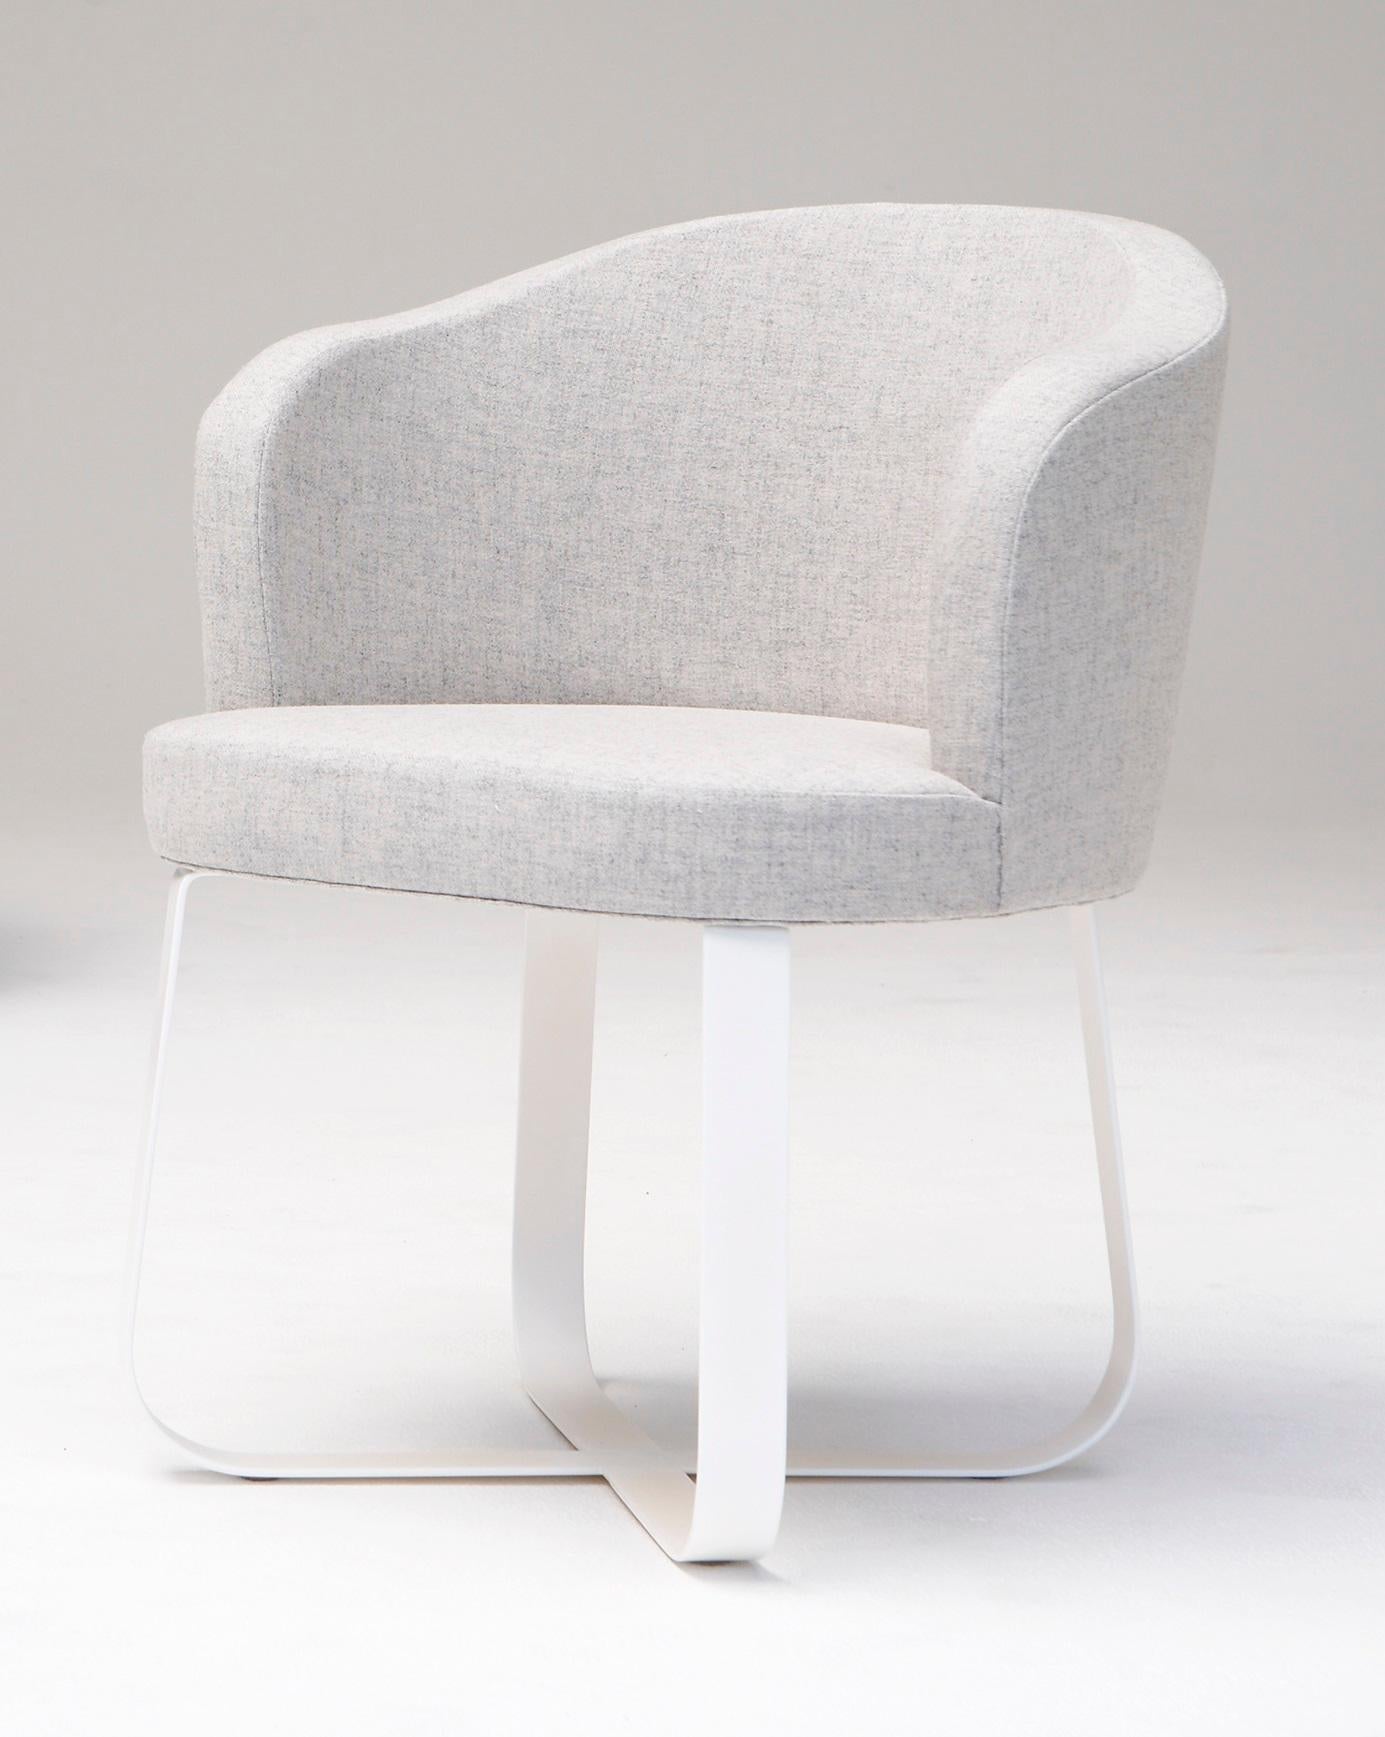 Primi Personal Chair by Phase Design
Dimensions: D 60.3 x W 62.2 x H 76.2 cm. 
Materials: Powder-coated steel and upholstery.

Solid steel flat bar available in a flat black or white powder coat or polished chrome finish with upholstered top. Powder